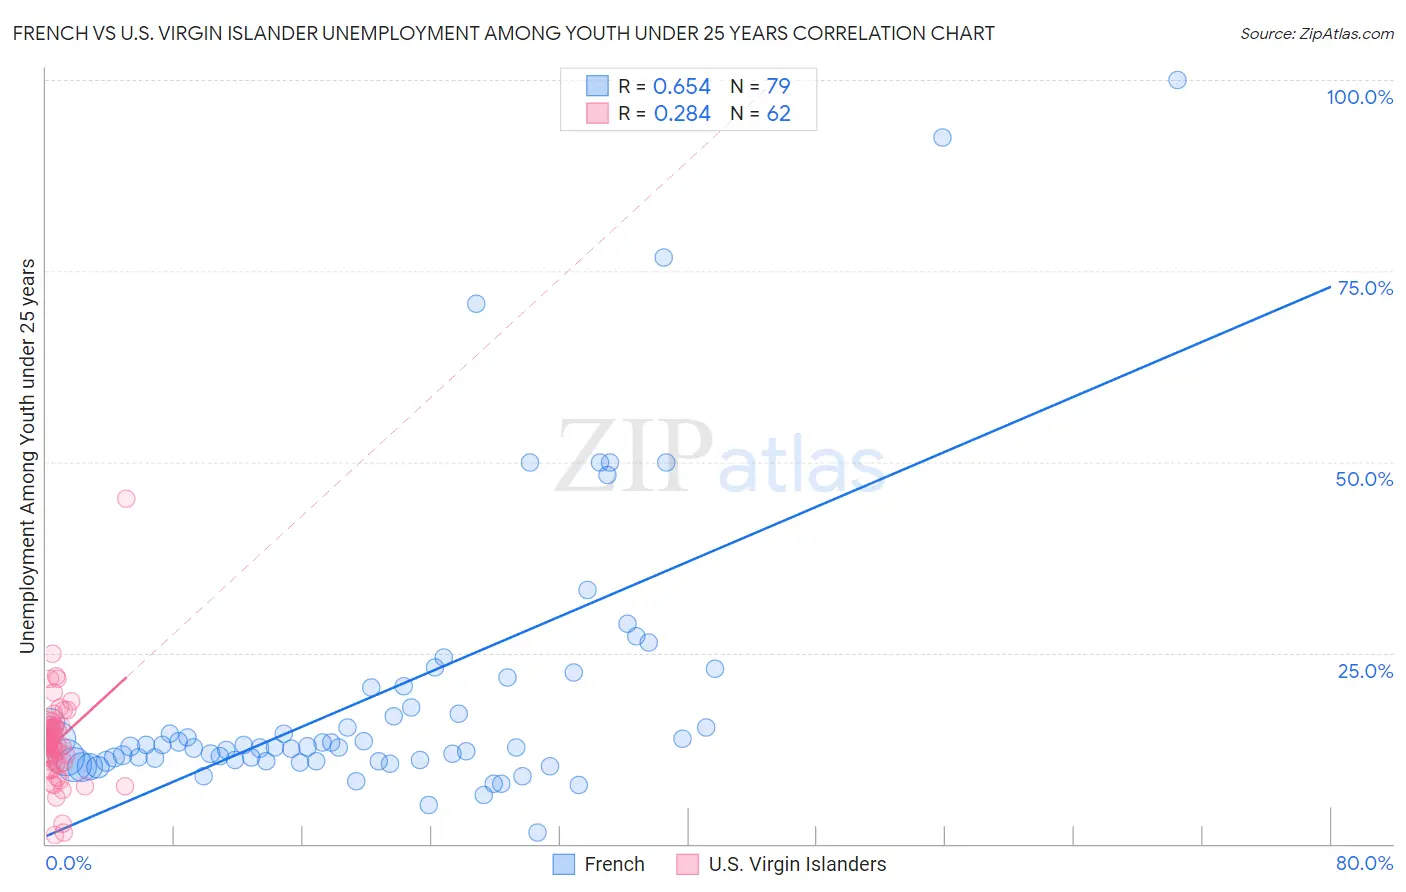 French vs U.S. Virgin Islander Unemployment Among Youth under 25 years